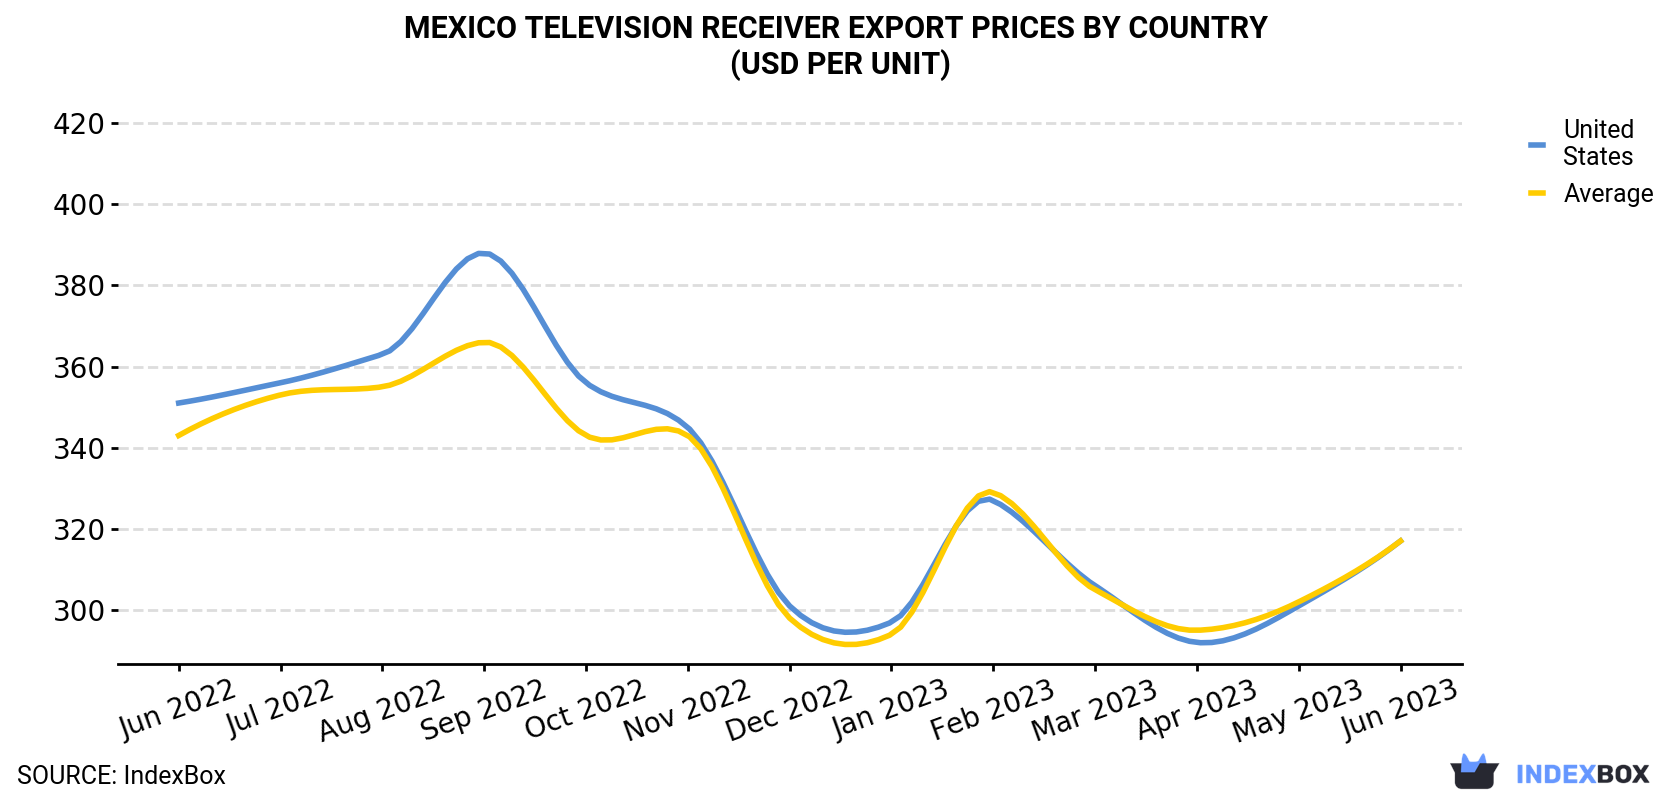 Mexico Television Receiver Export Prices By Country (USD Per Unit)